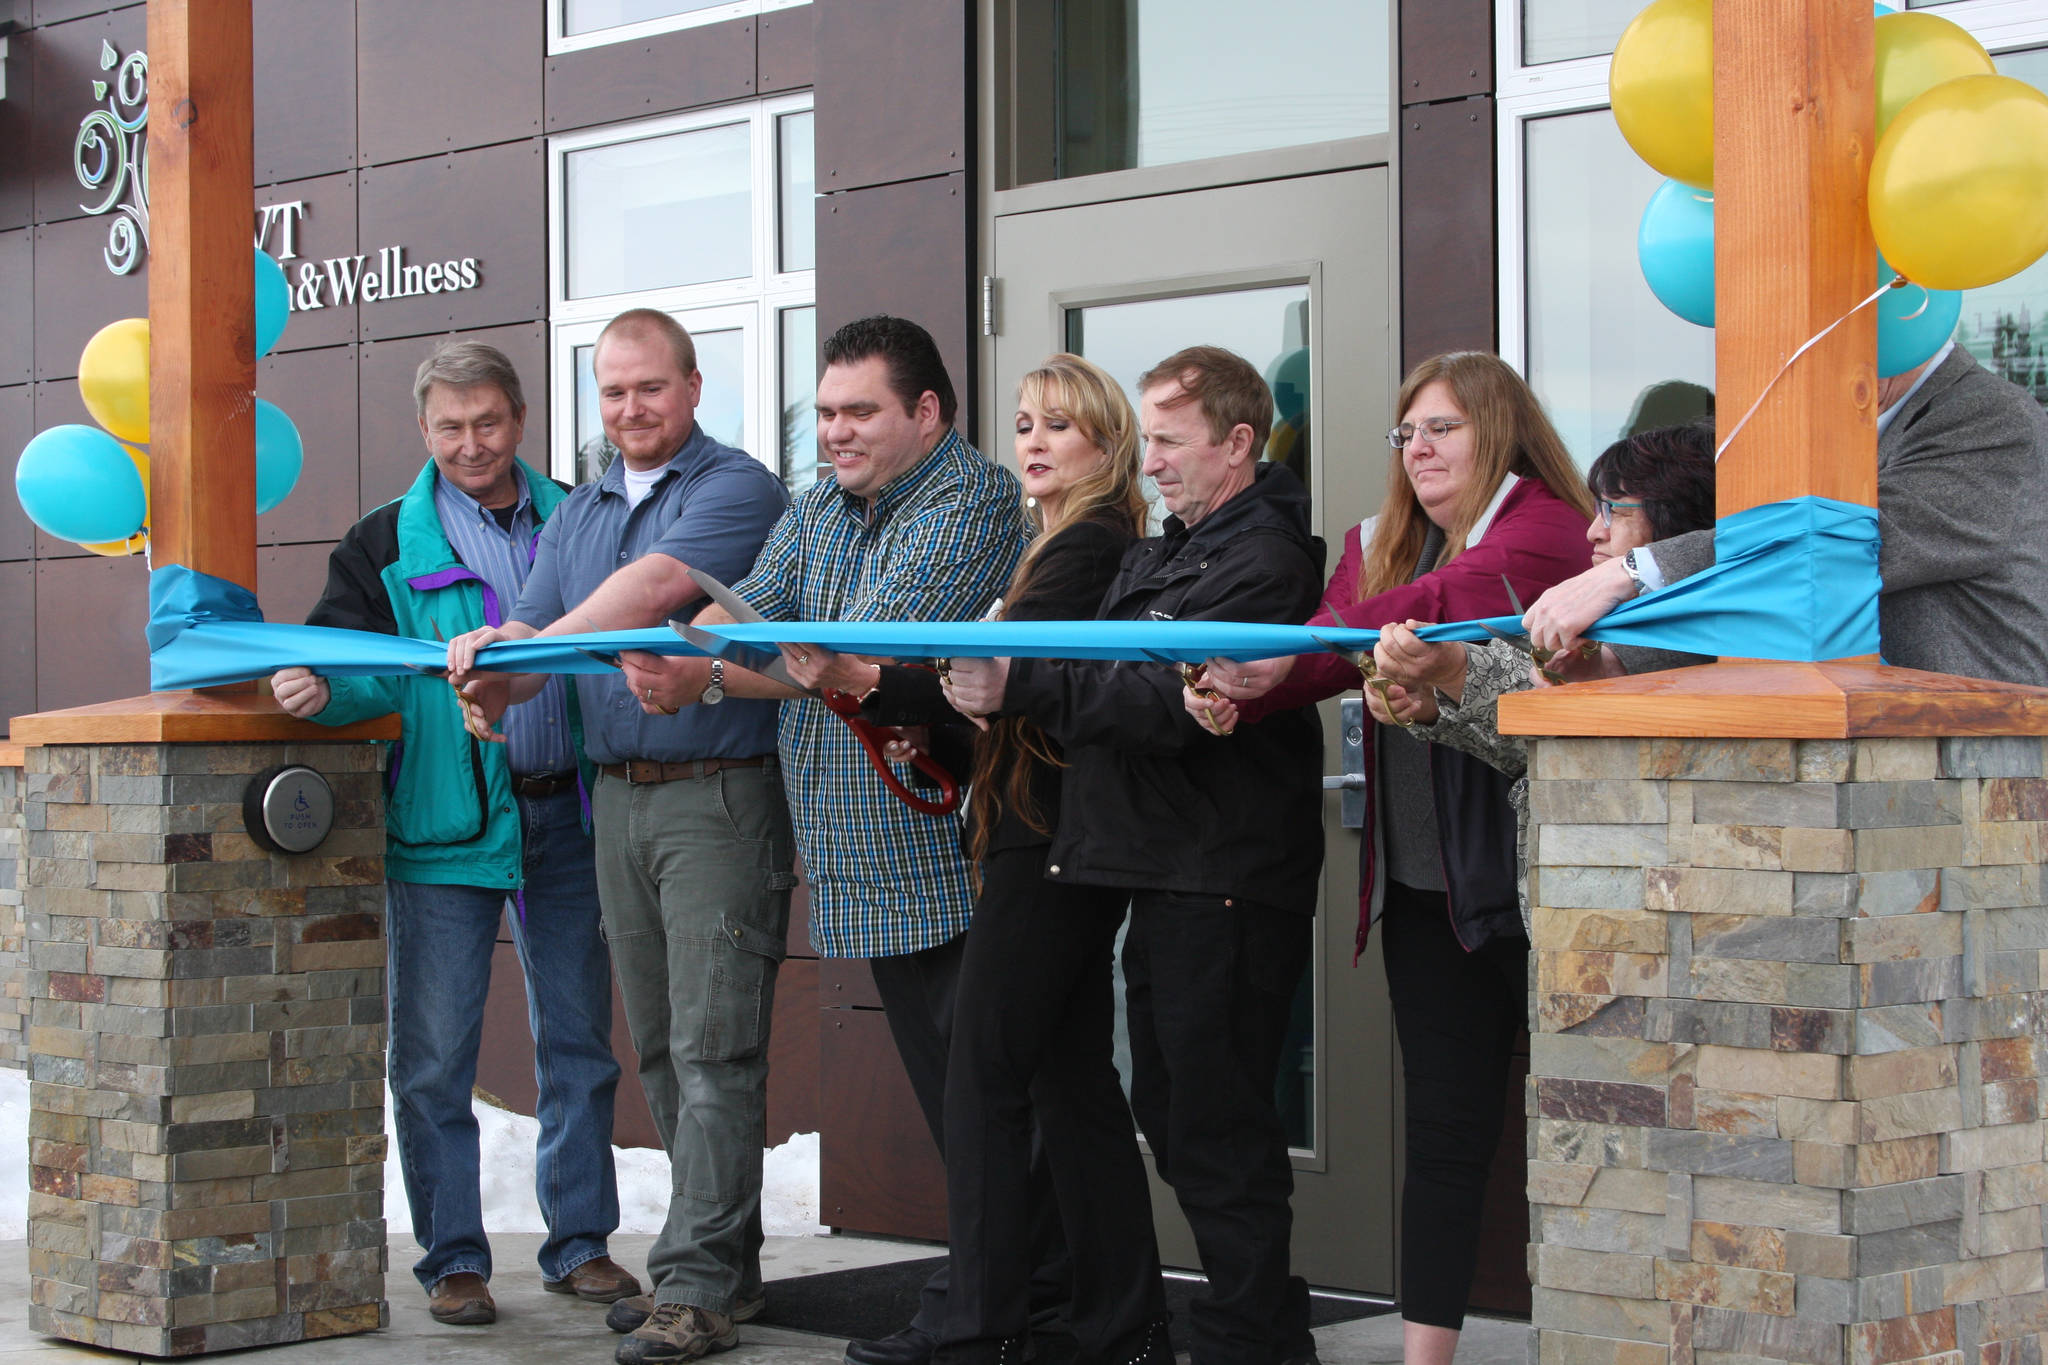 From left to right, John Baker, Jacob Baker, Paul Baril, Crystal Collier, Kim Collier, Trinket Gallien, Lillian Elvsaas, and John Crawford prepare to cut the ribbon for the new Anchor Point SVT Health and Wellness Center at the grand opening ceremony at noon Friday, March 8, 2019, in Anchor Point, Alaska. (Photo by Delcenia Cosman)